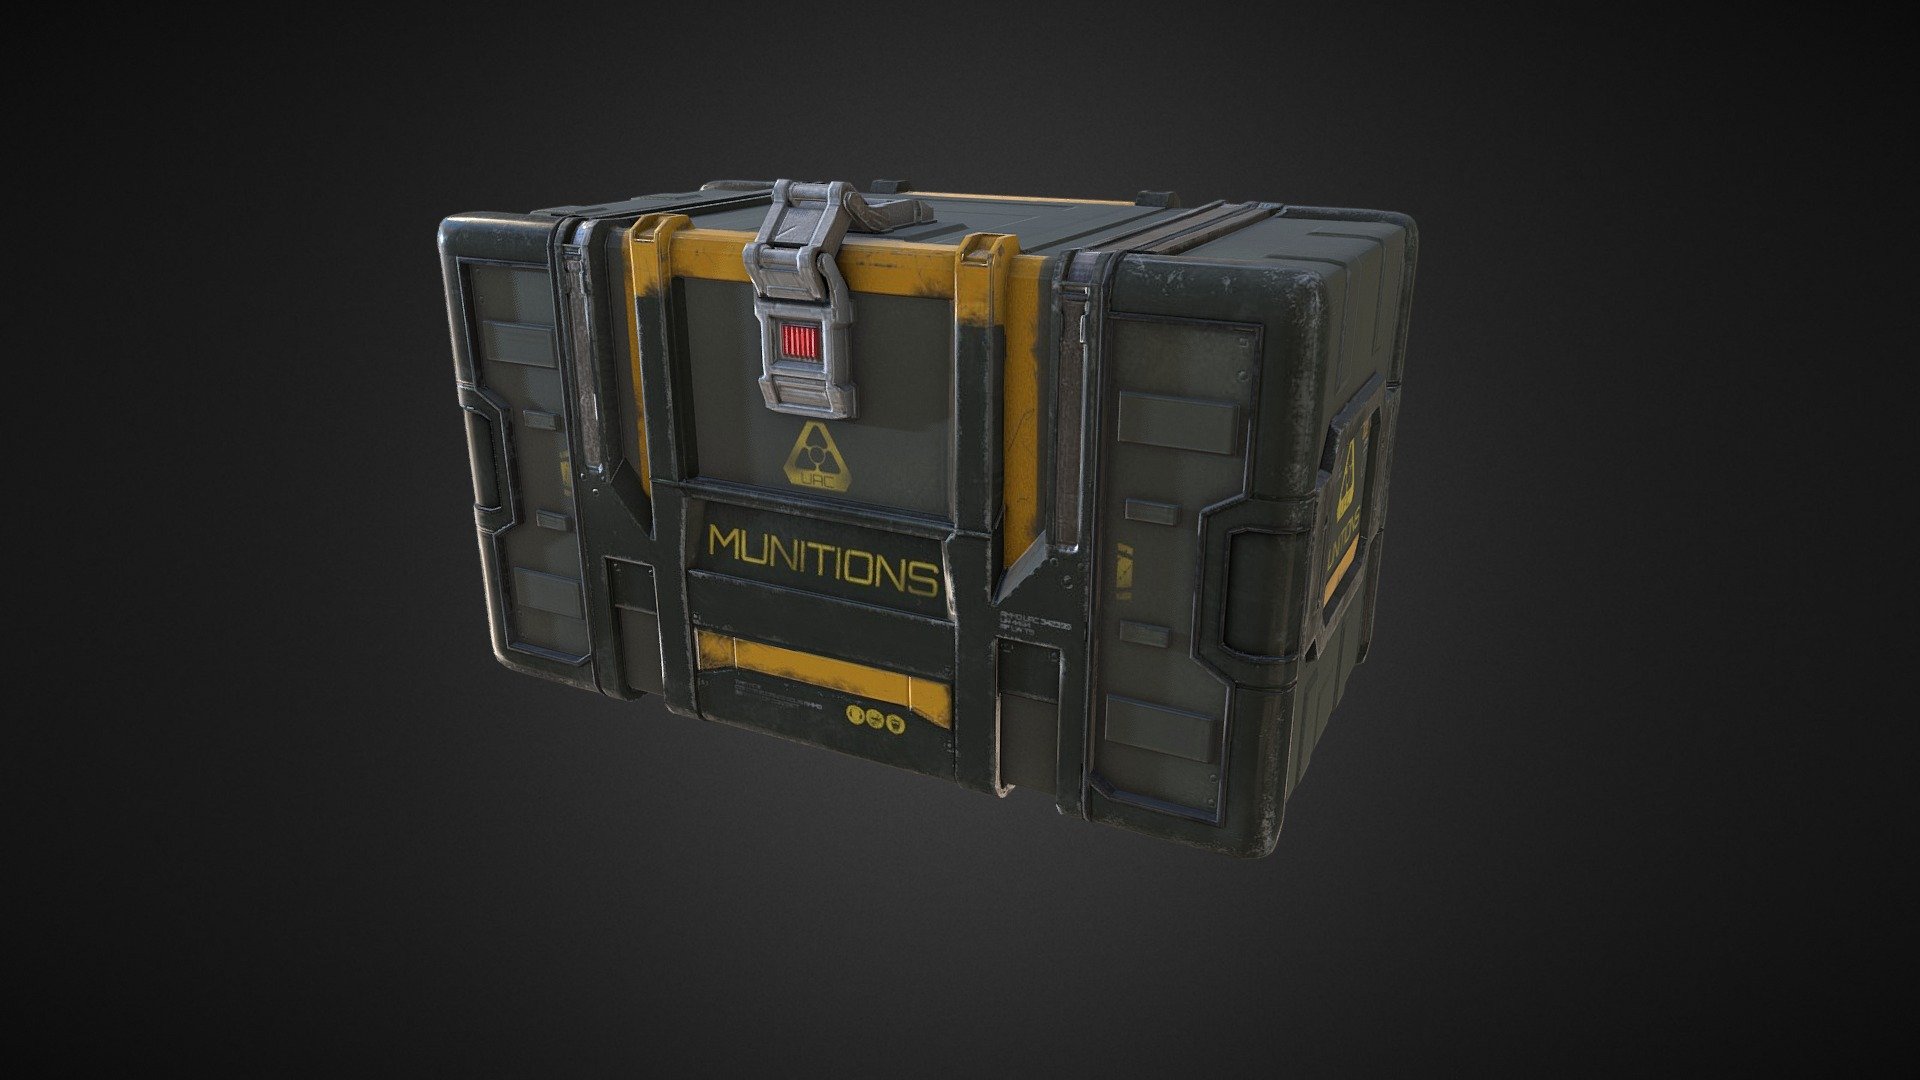 the concept of the crate is  from Colin Geller
&ldquo;ammo crate